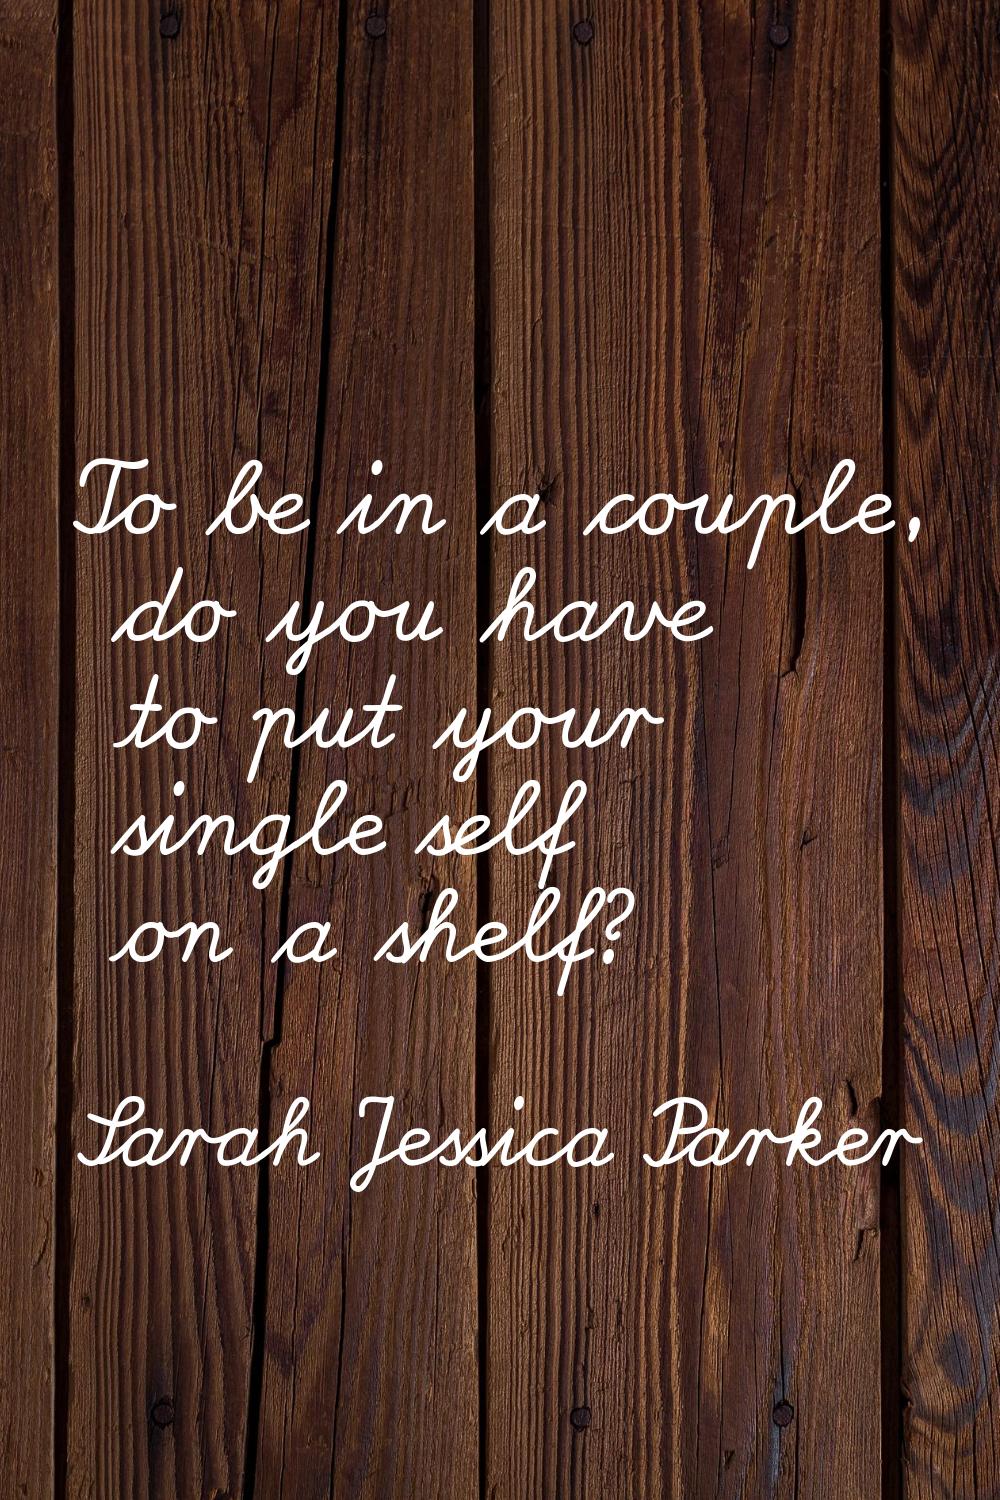 To be in a couple, do you have to put your single self on a shelf?